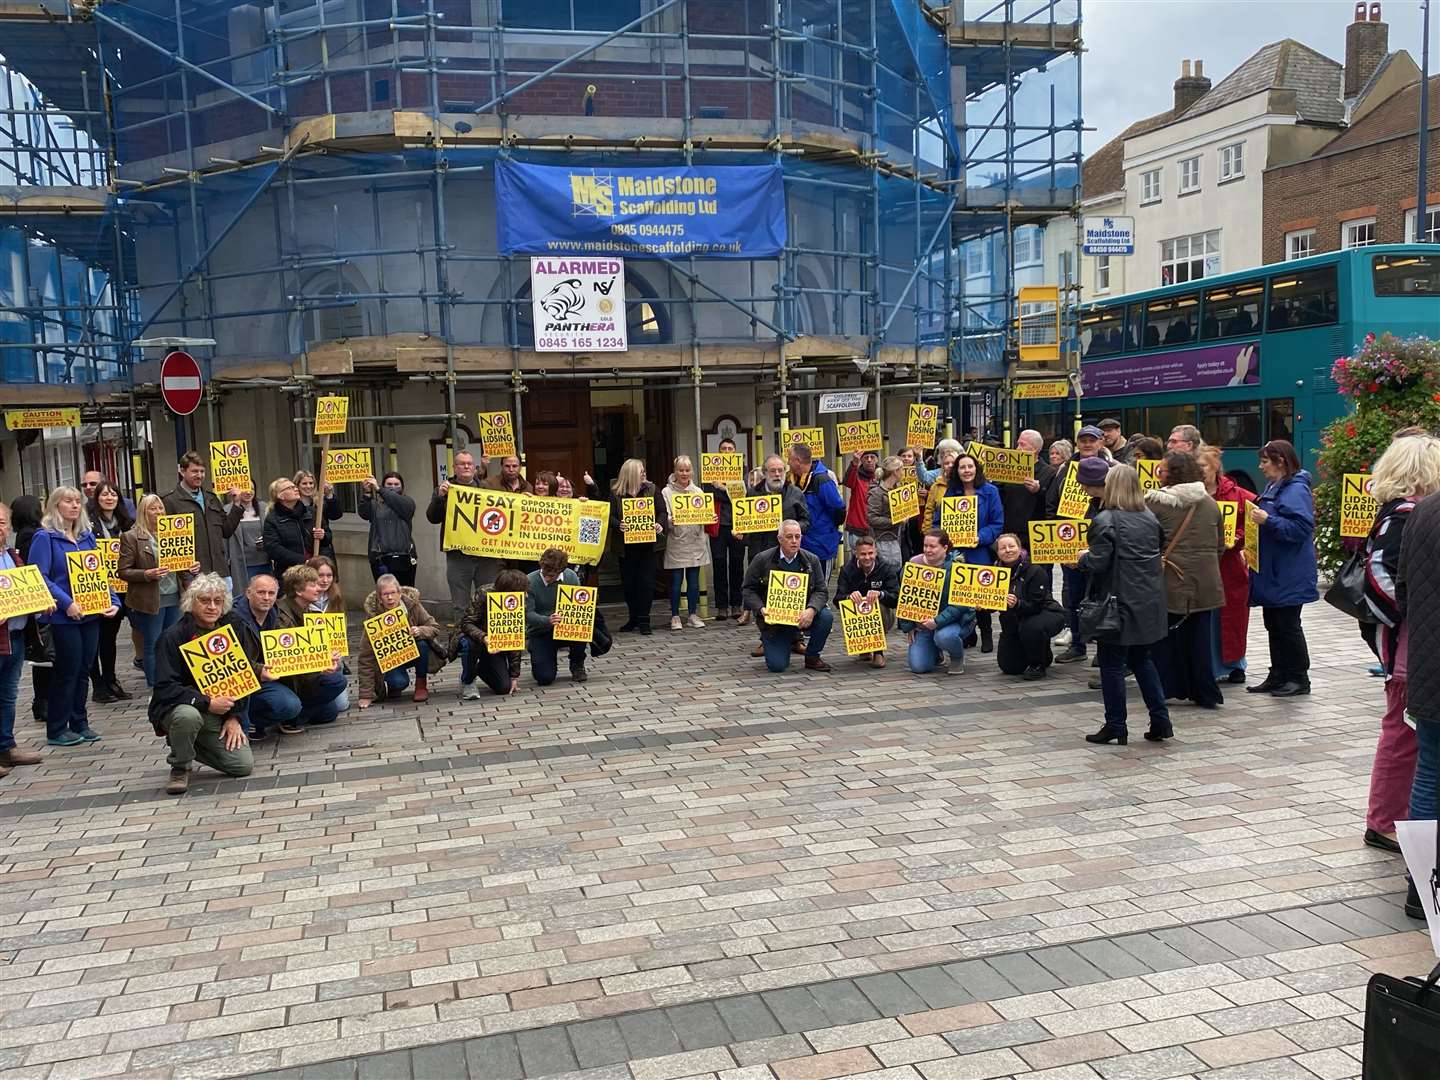 Opponents of the Lidsing scheme picket Maidstone Town Hall